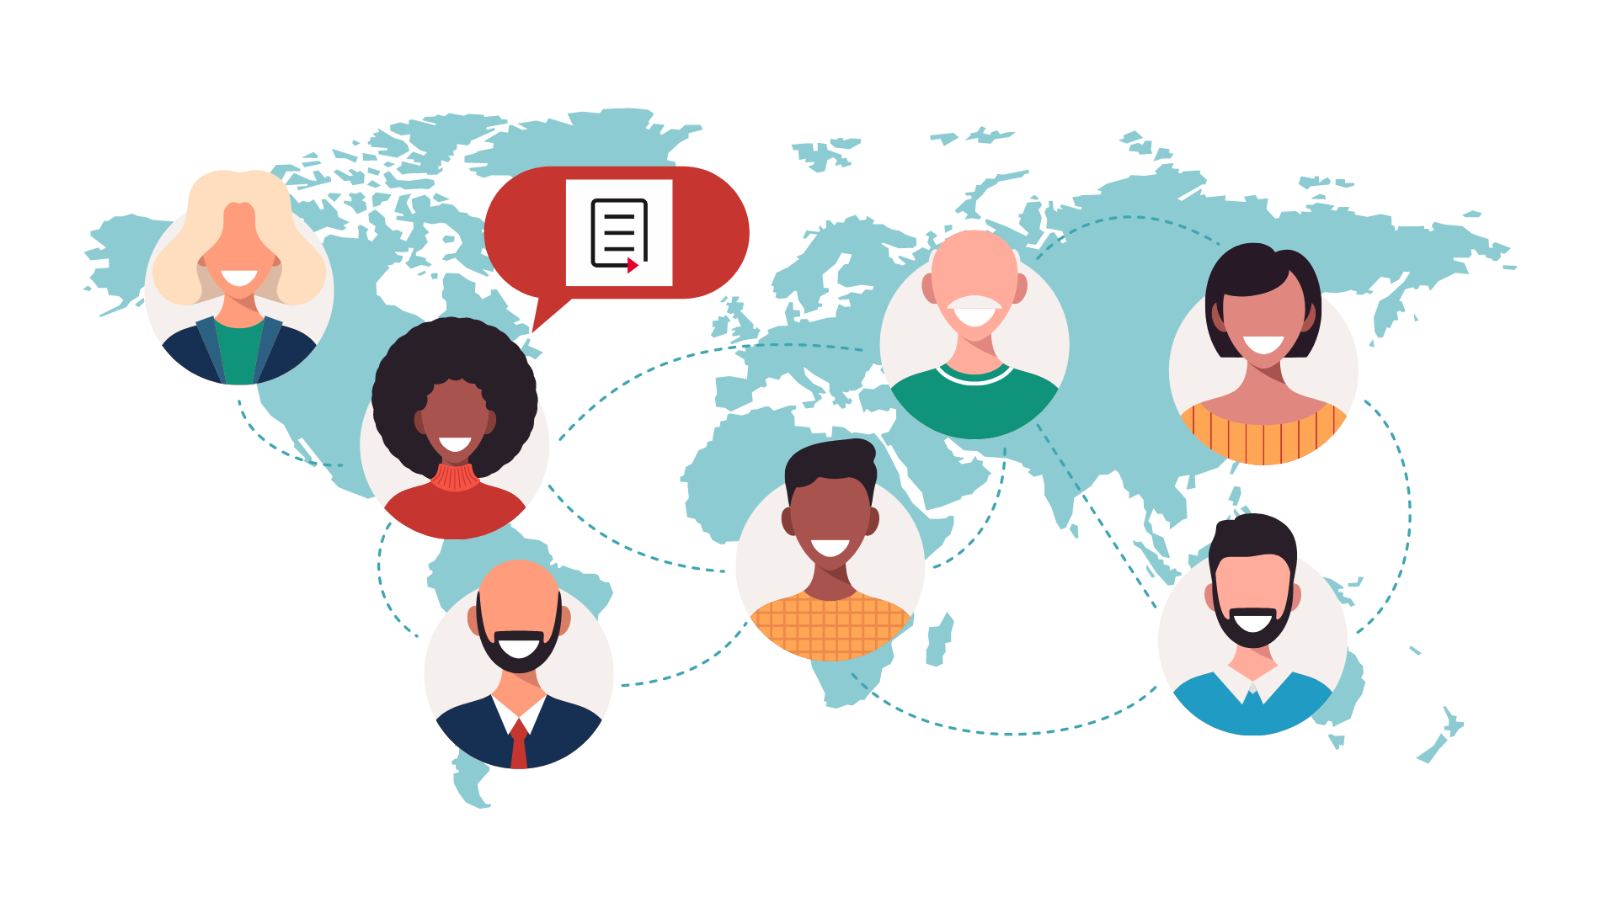 A diverse group of people of different ethnicities are drawn in a cartoon style and postioned across the globe with dotted lines connecting them. They are all smiling, one person has a speech bubble with the PREreview logo inside depicting the topic of conversation.